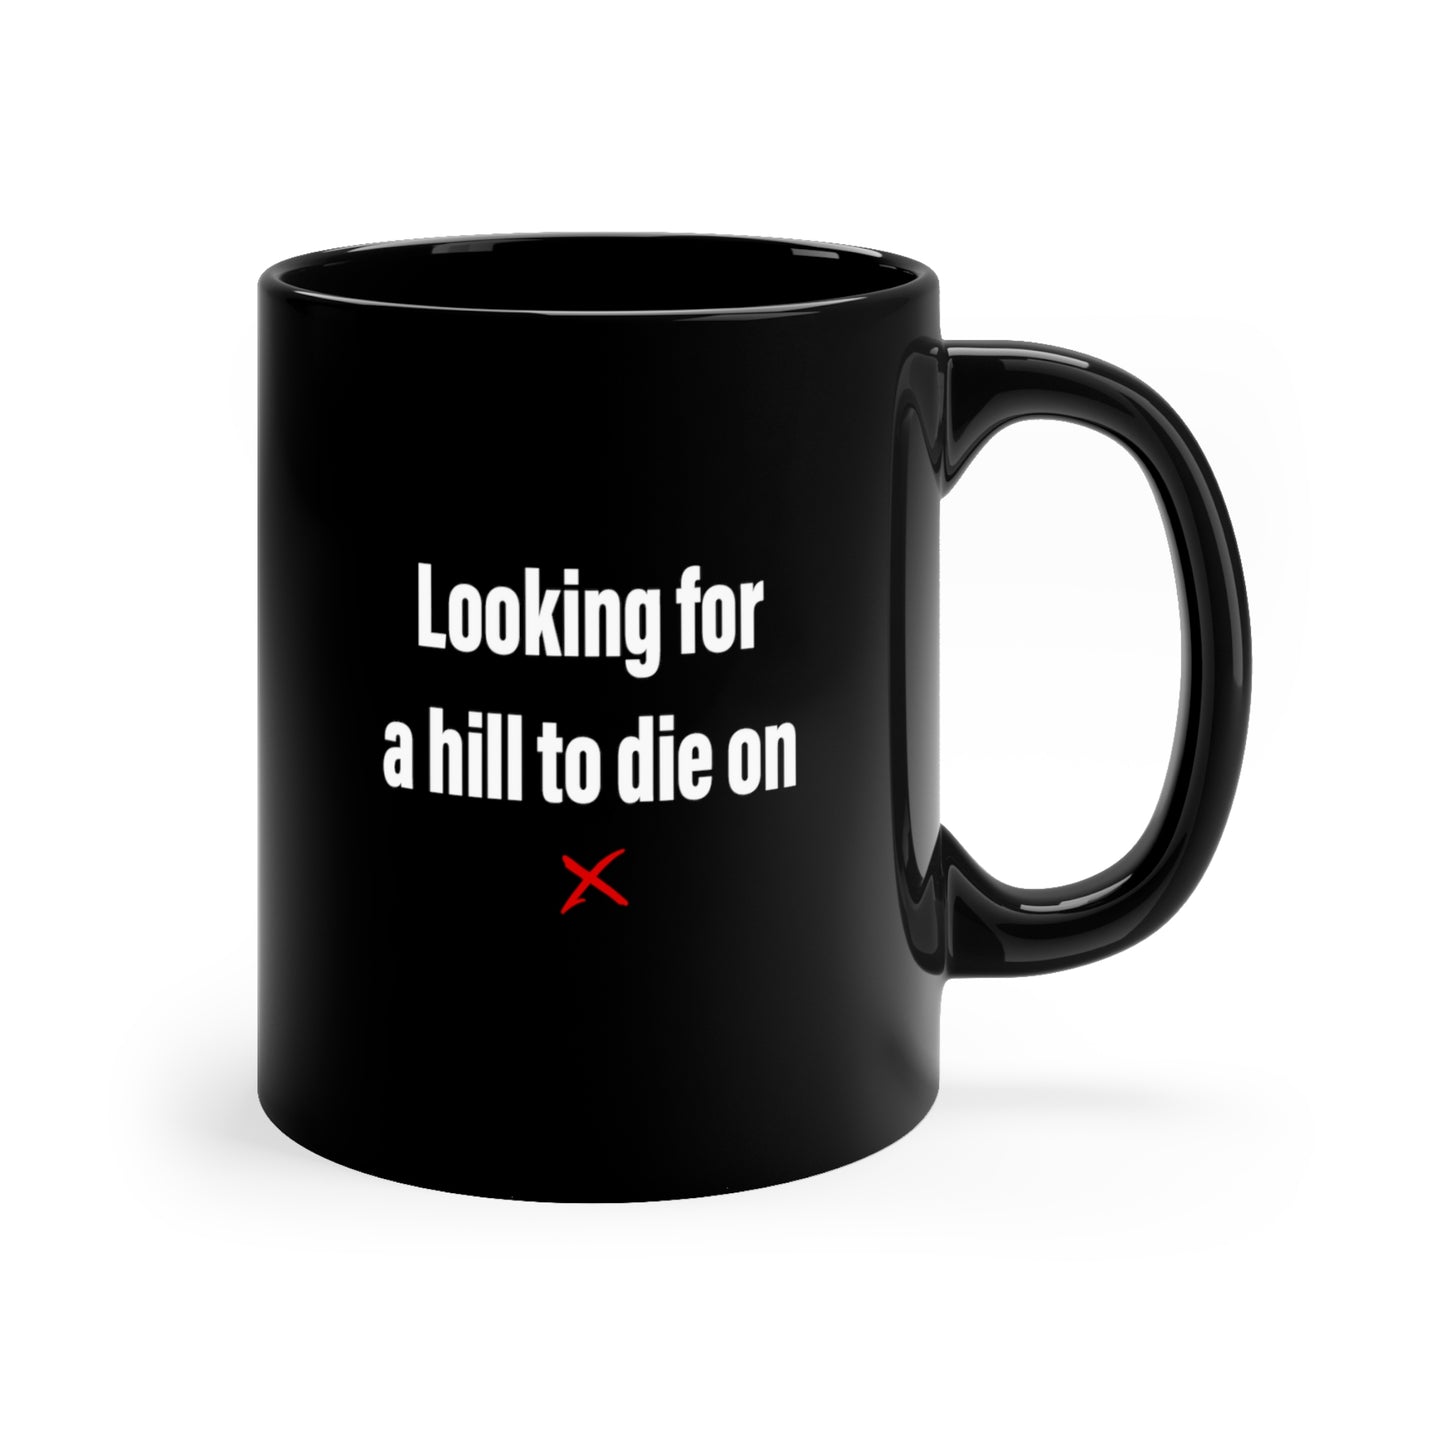 Looking for a hill to die on - Mug